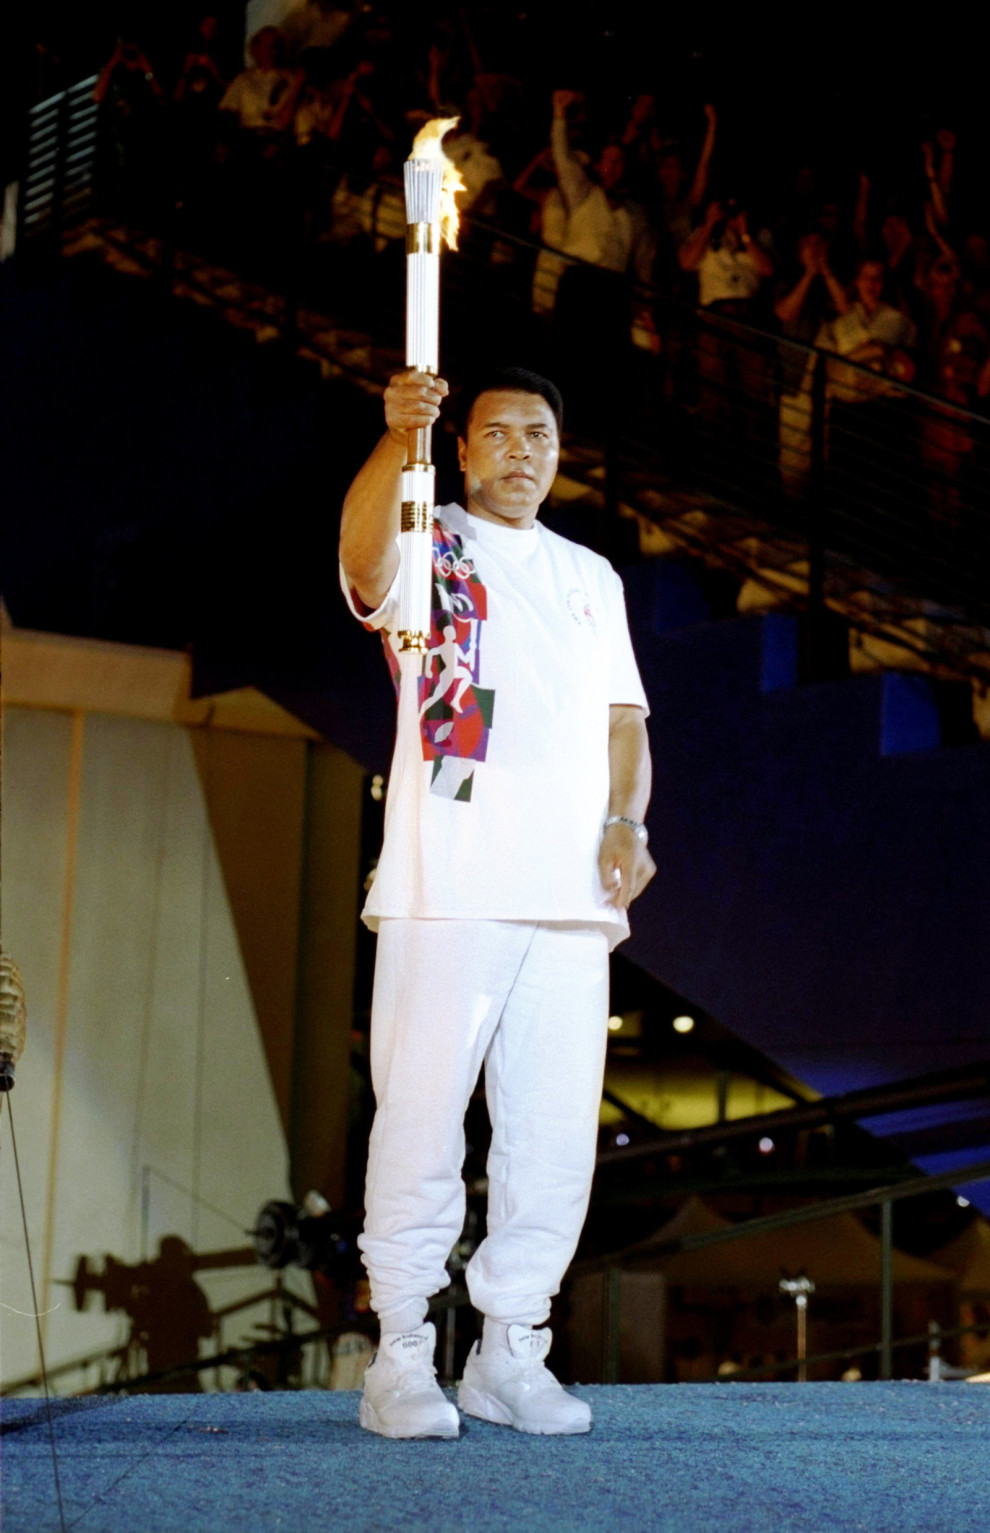 Thirty-six years after Cassius Clay took home gold in Rome, he was invited back for an honor suited for the world’s greatest — to light the Olympic flame during the opening ceremony of the 1996 Centennial Olympic Games in Atlanta. Clay, who was then 54 years old and visibly suffering from Parkinson’s disease, rose to the occasion for what is now considered one of the most emotional moments in all of Olympics history.